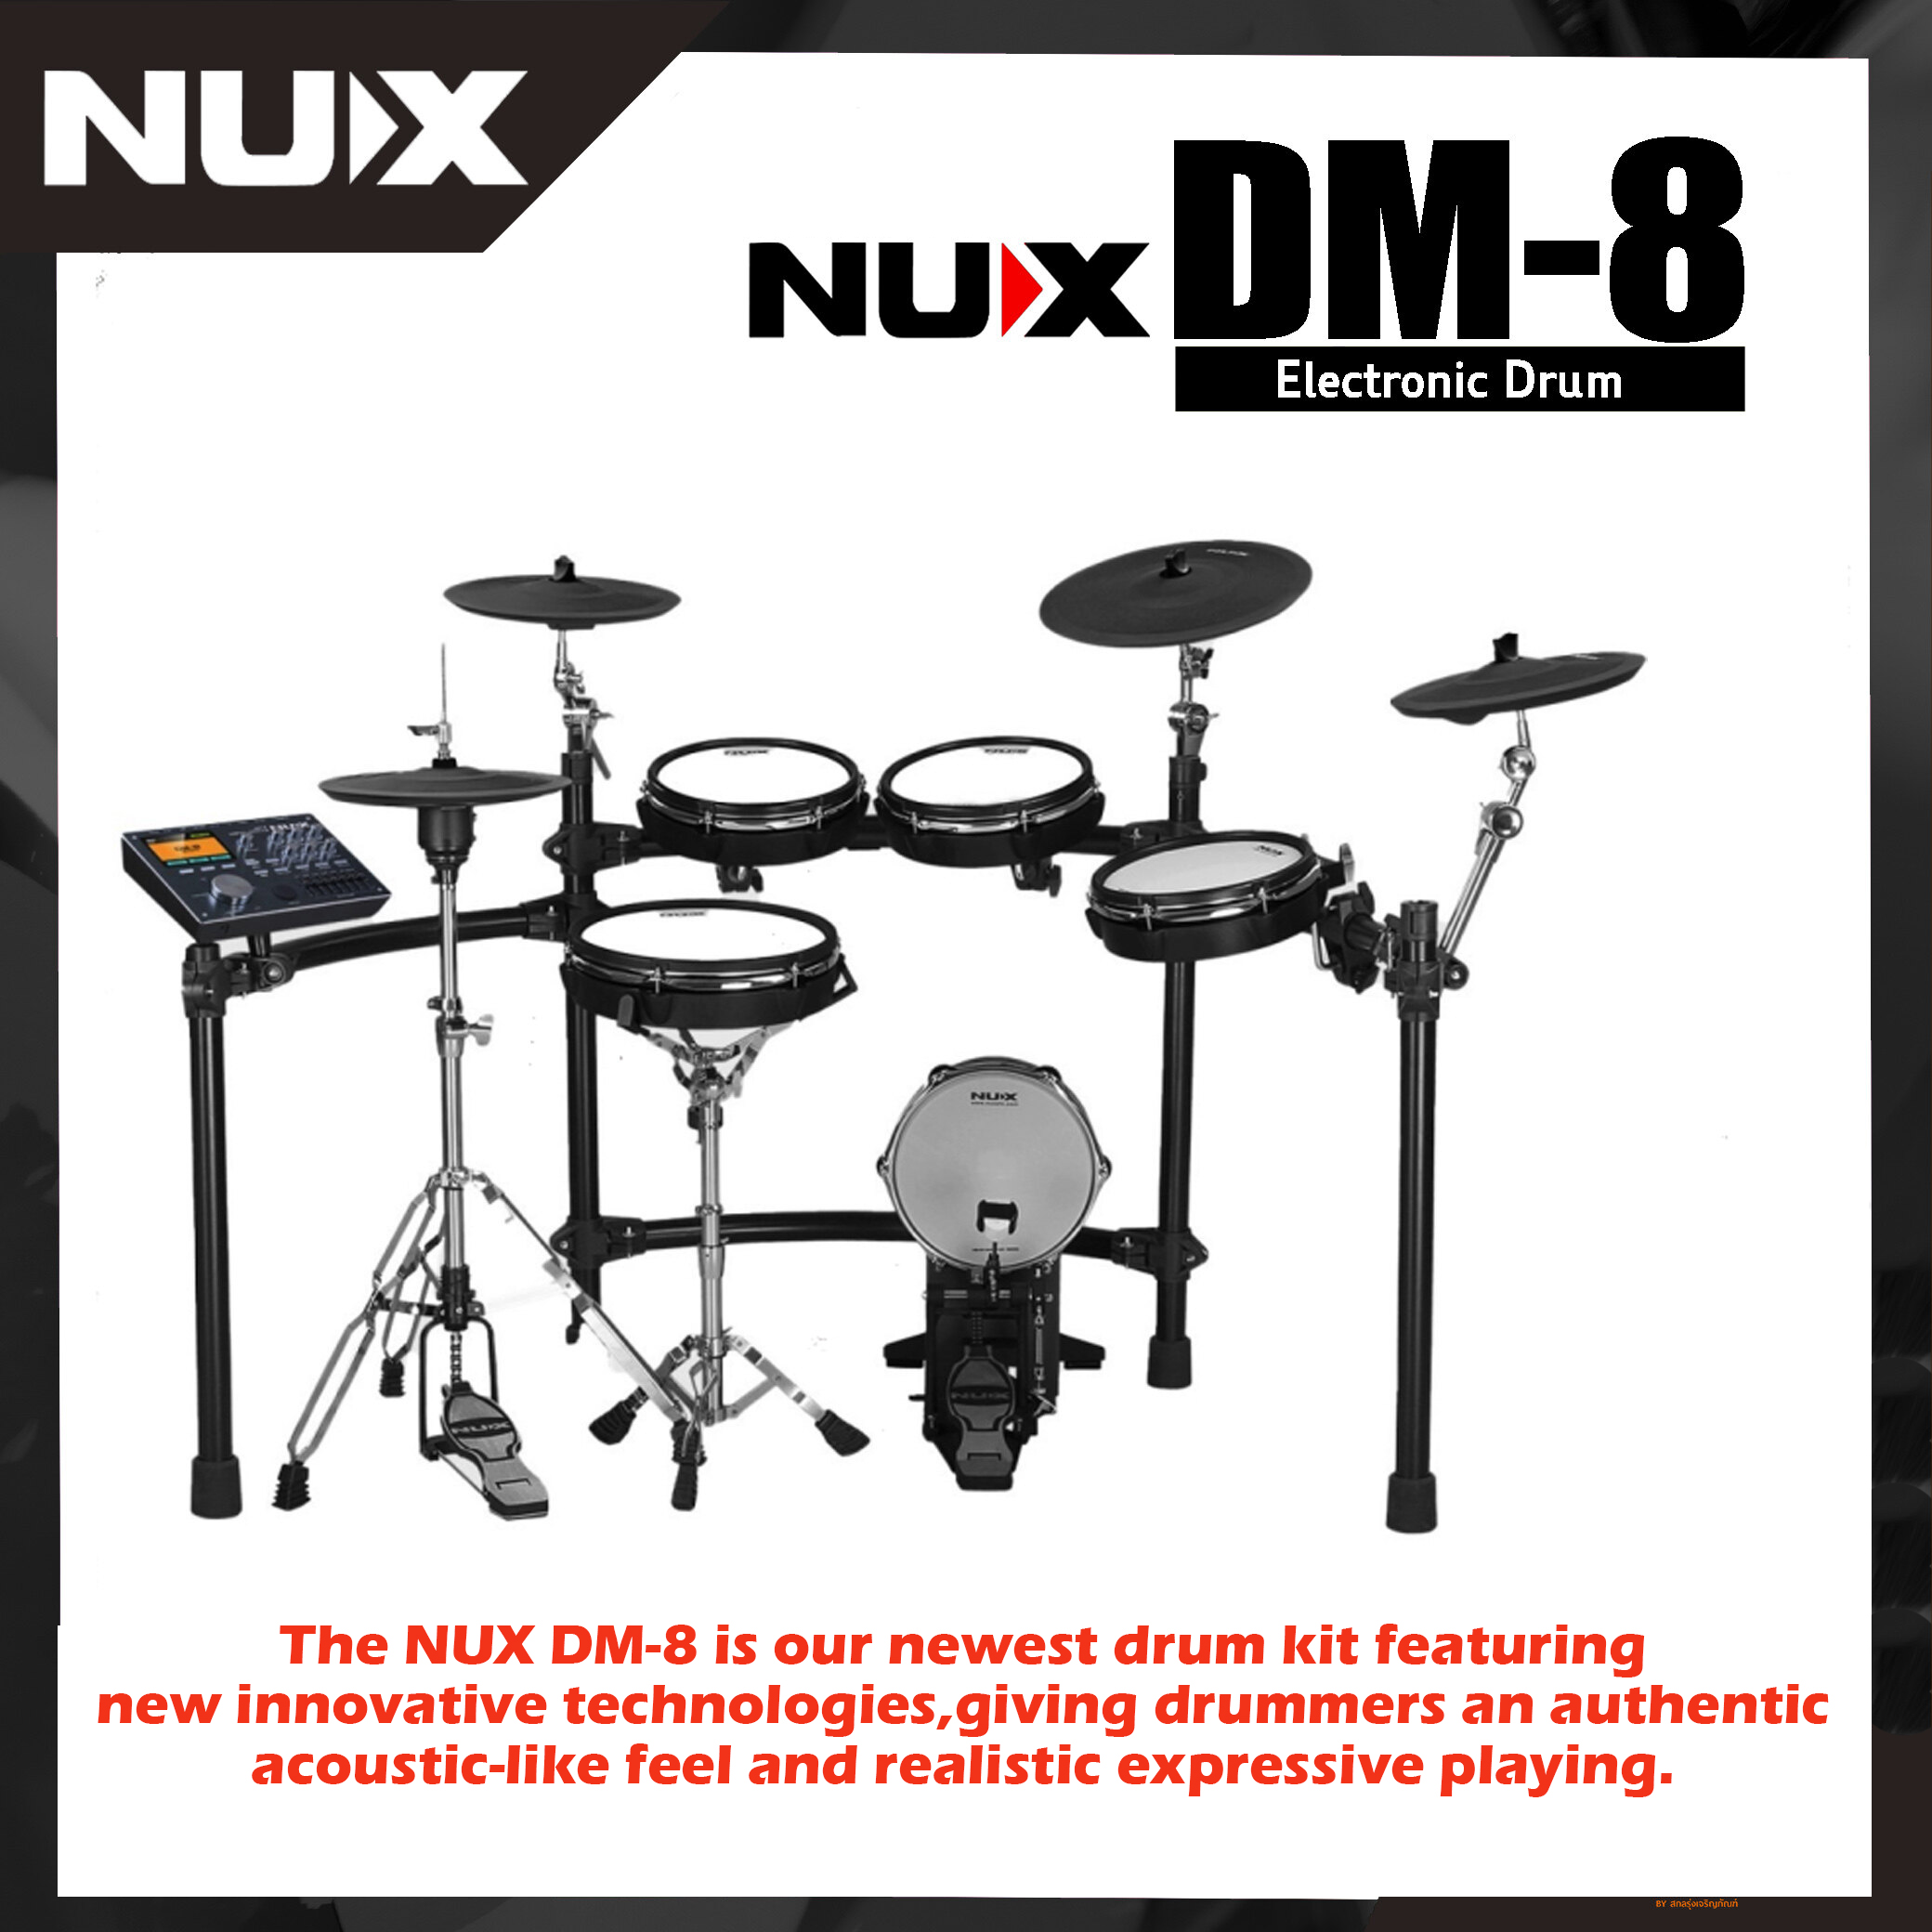 NUX DM-8 Digital Electronic Drum Kit, Authentic Acoustic-like Feel, Realistic Expressive Playing